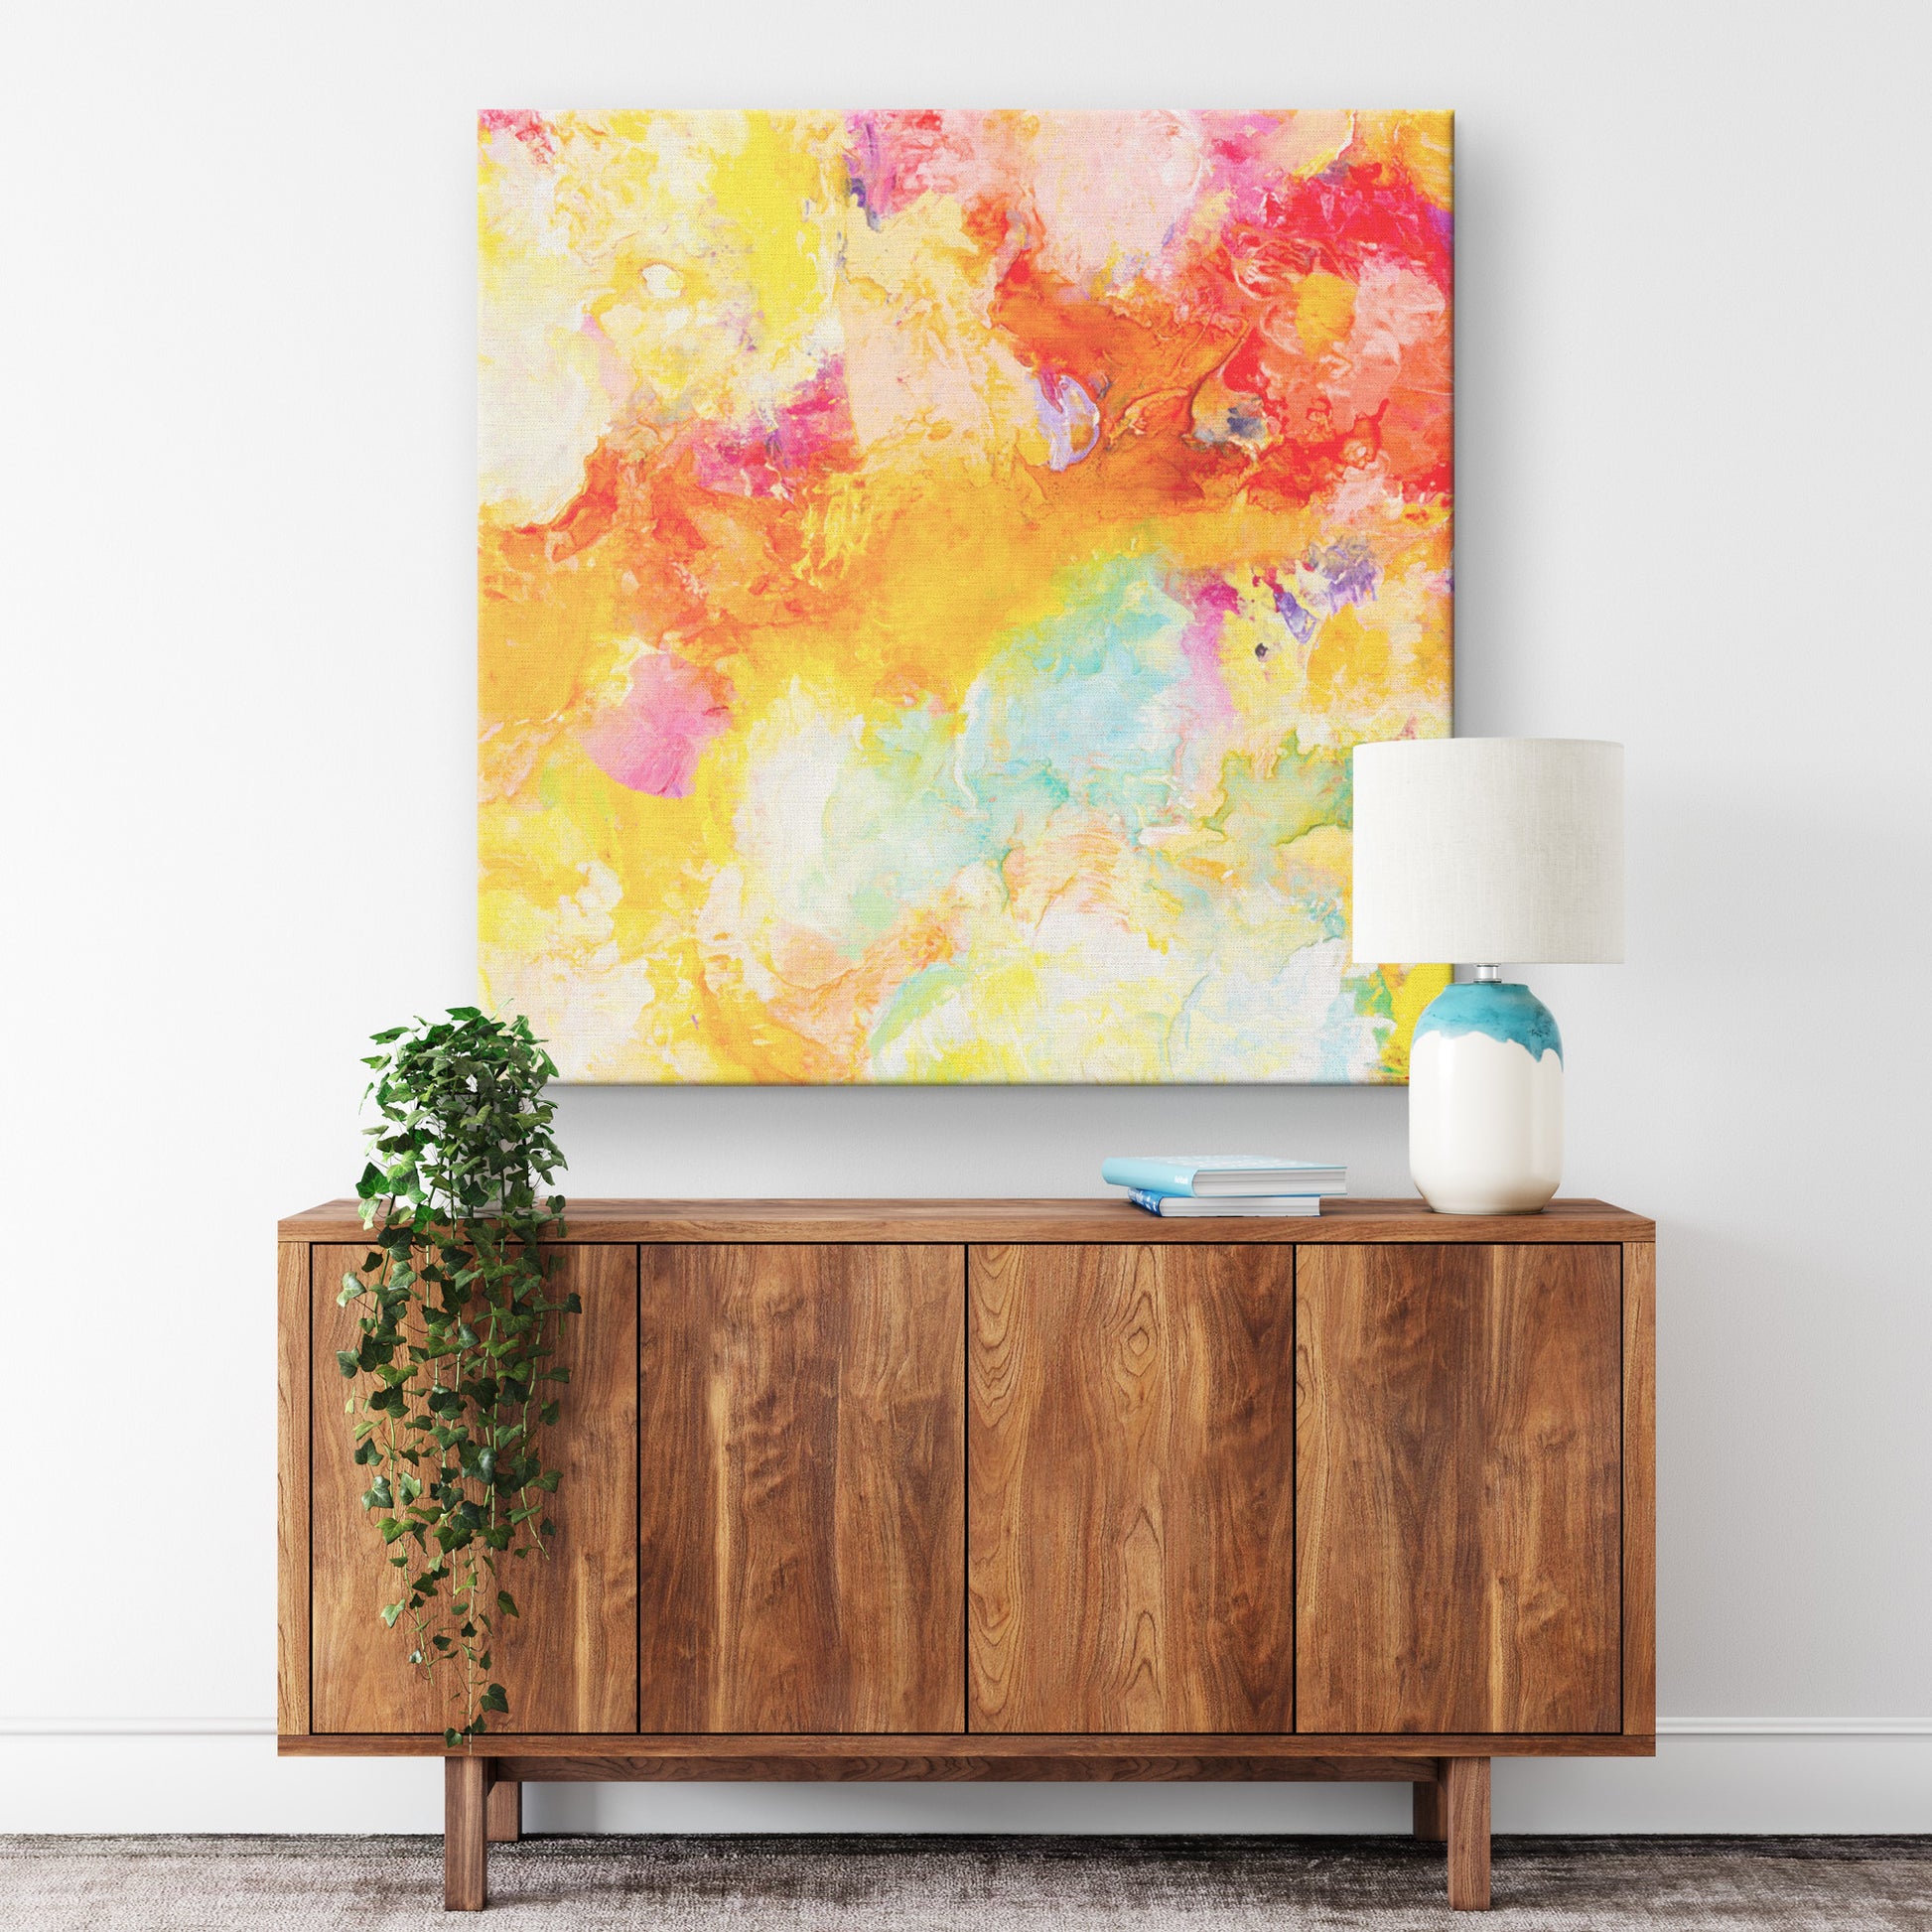 good vibes and positive energy art and decor